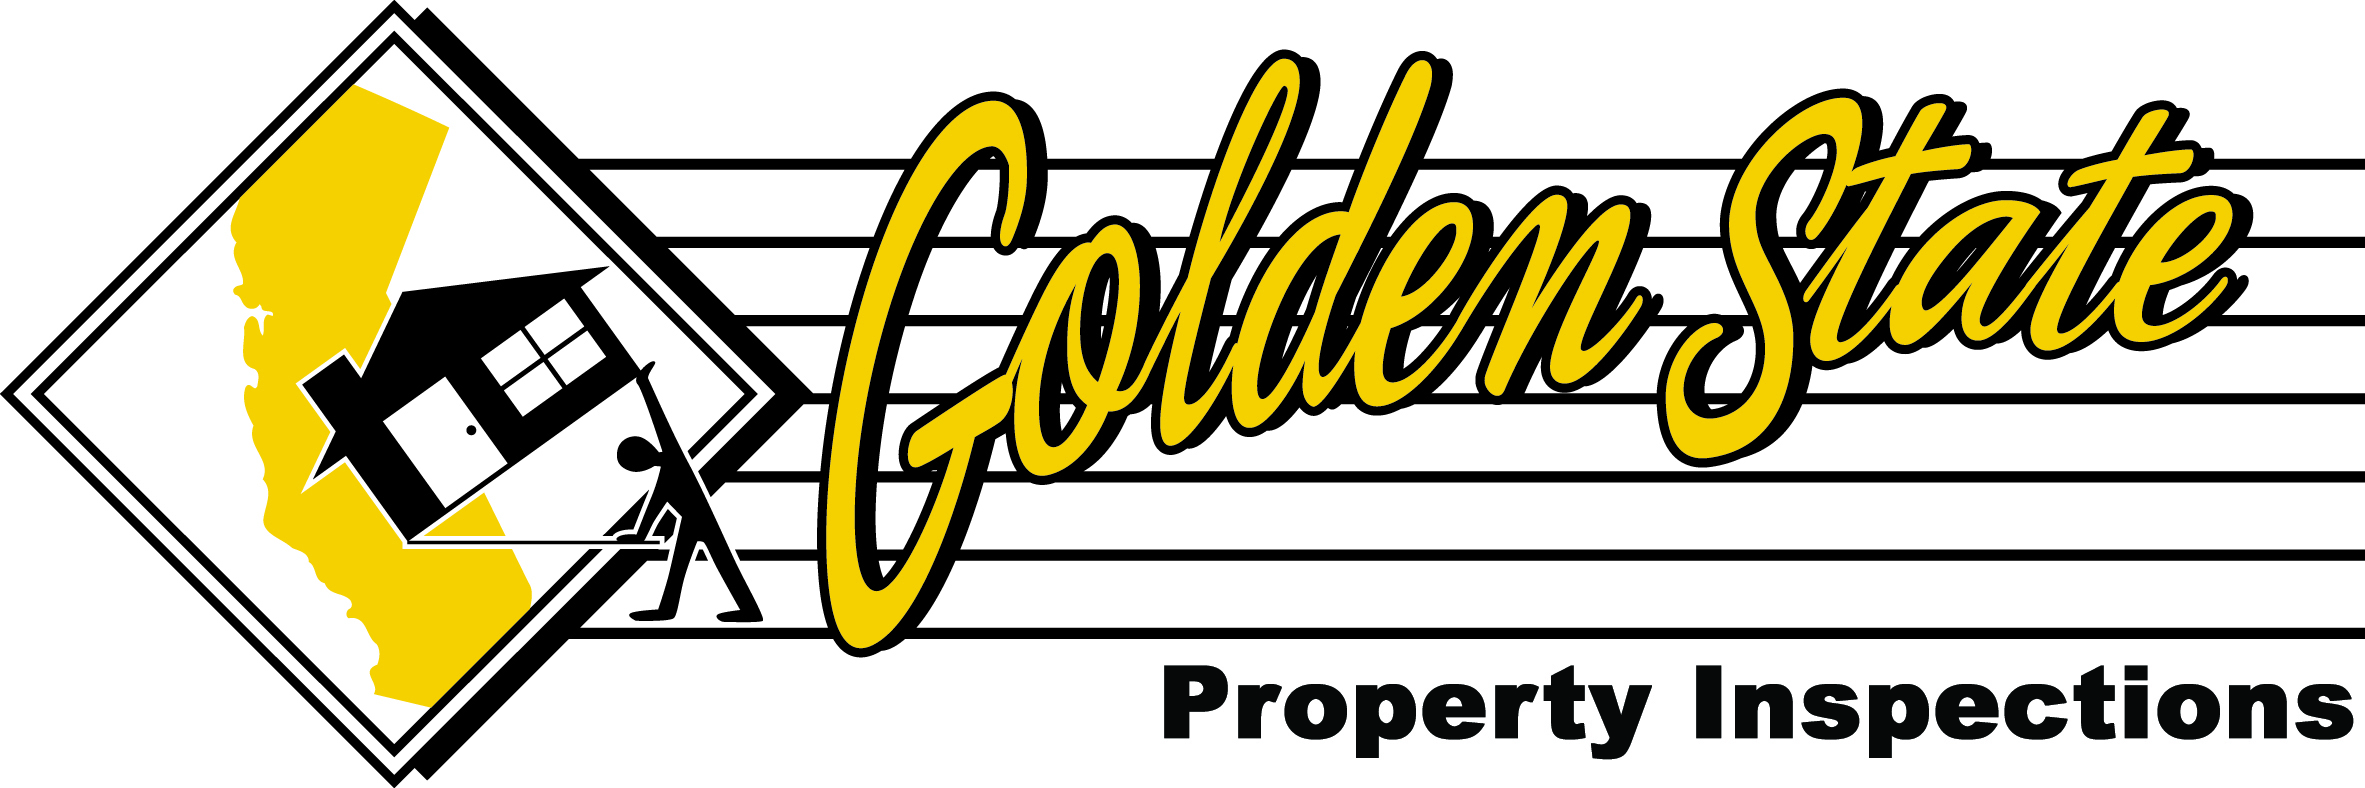 Golden State Property Inspections Logo